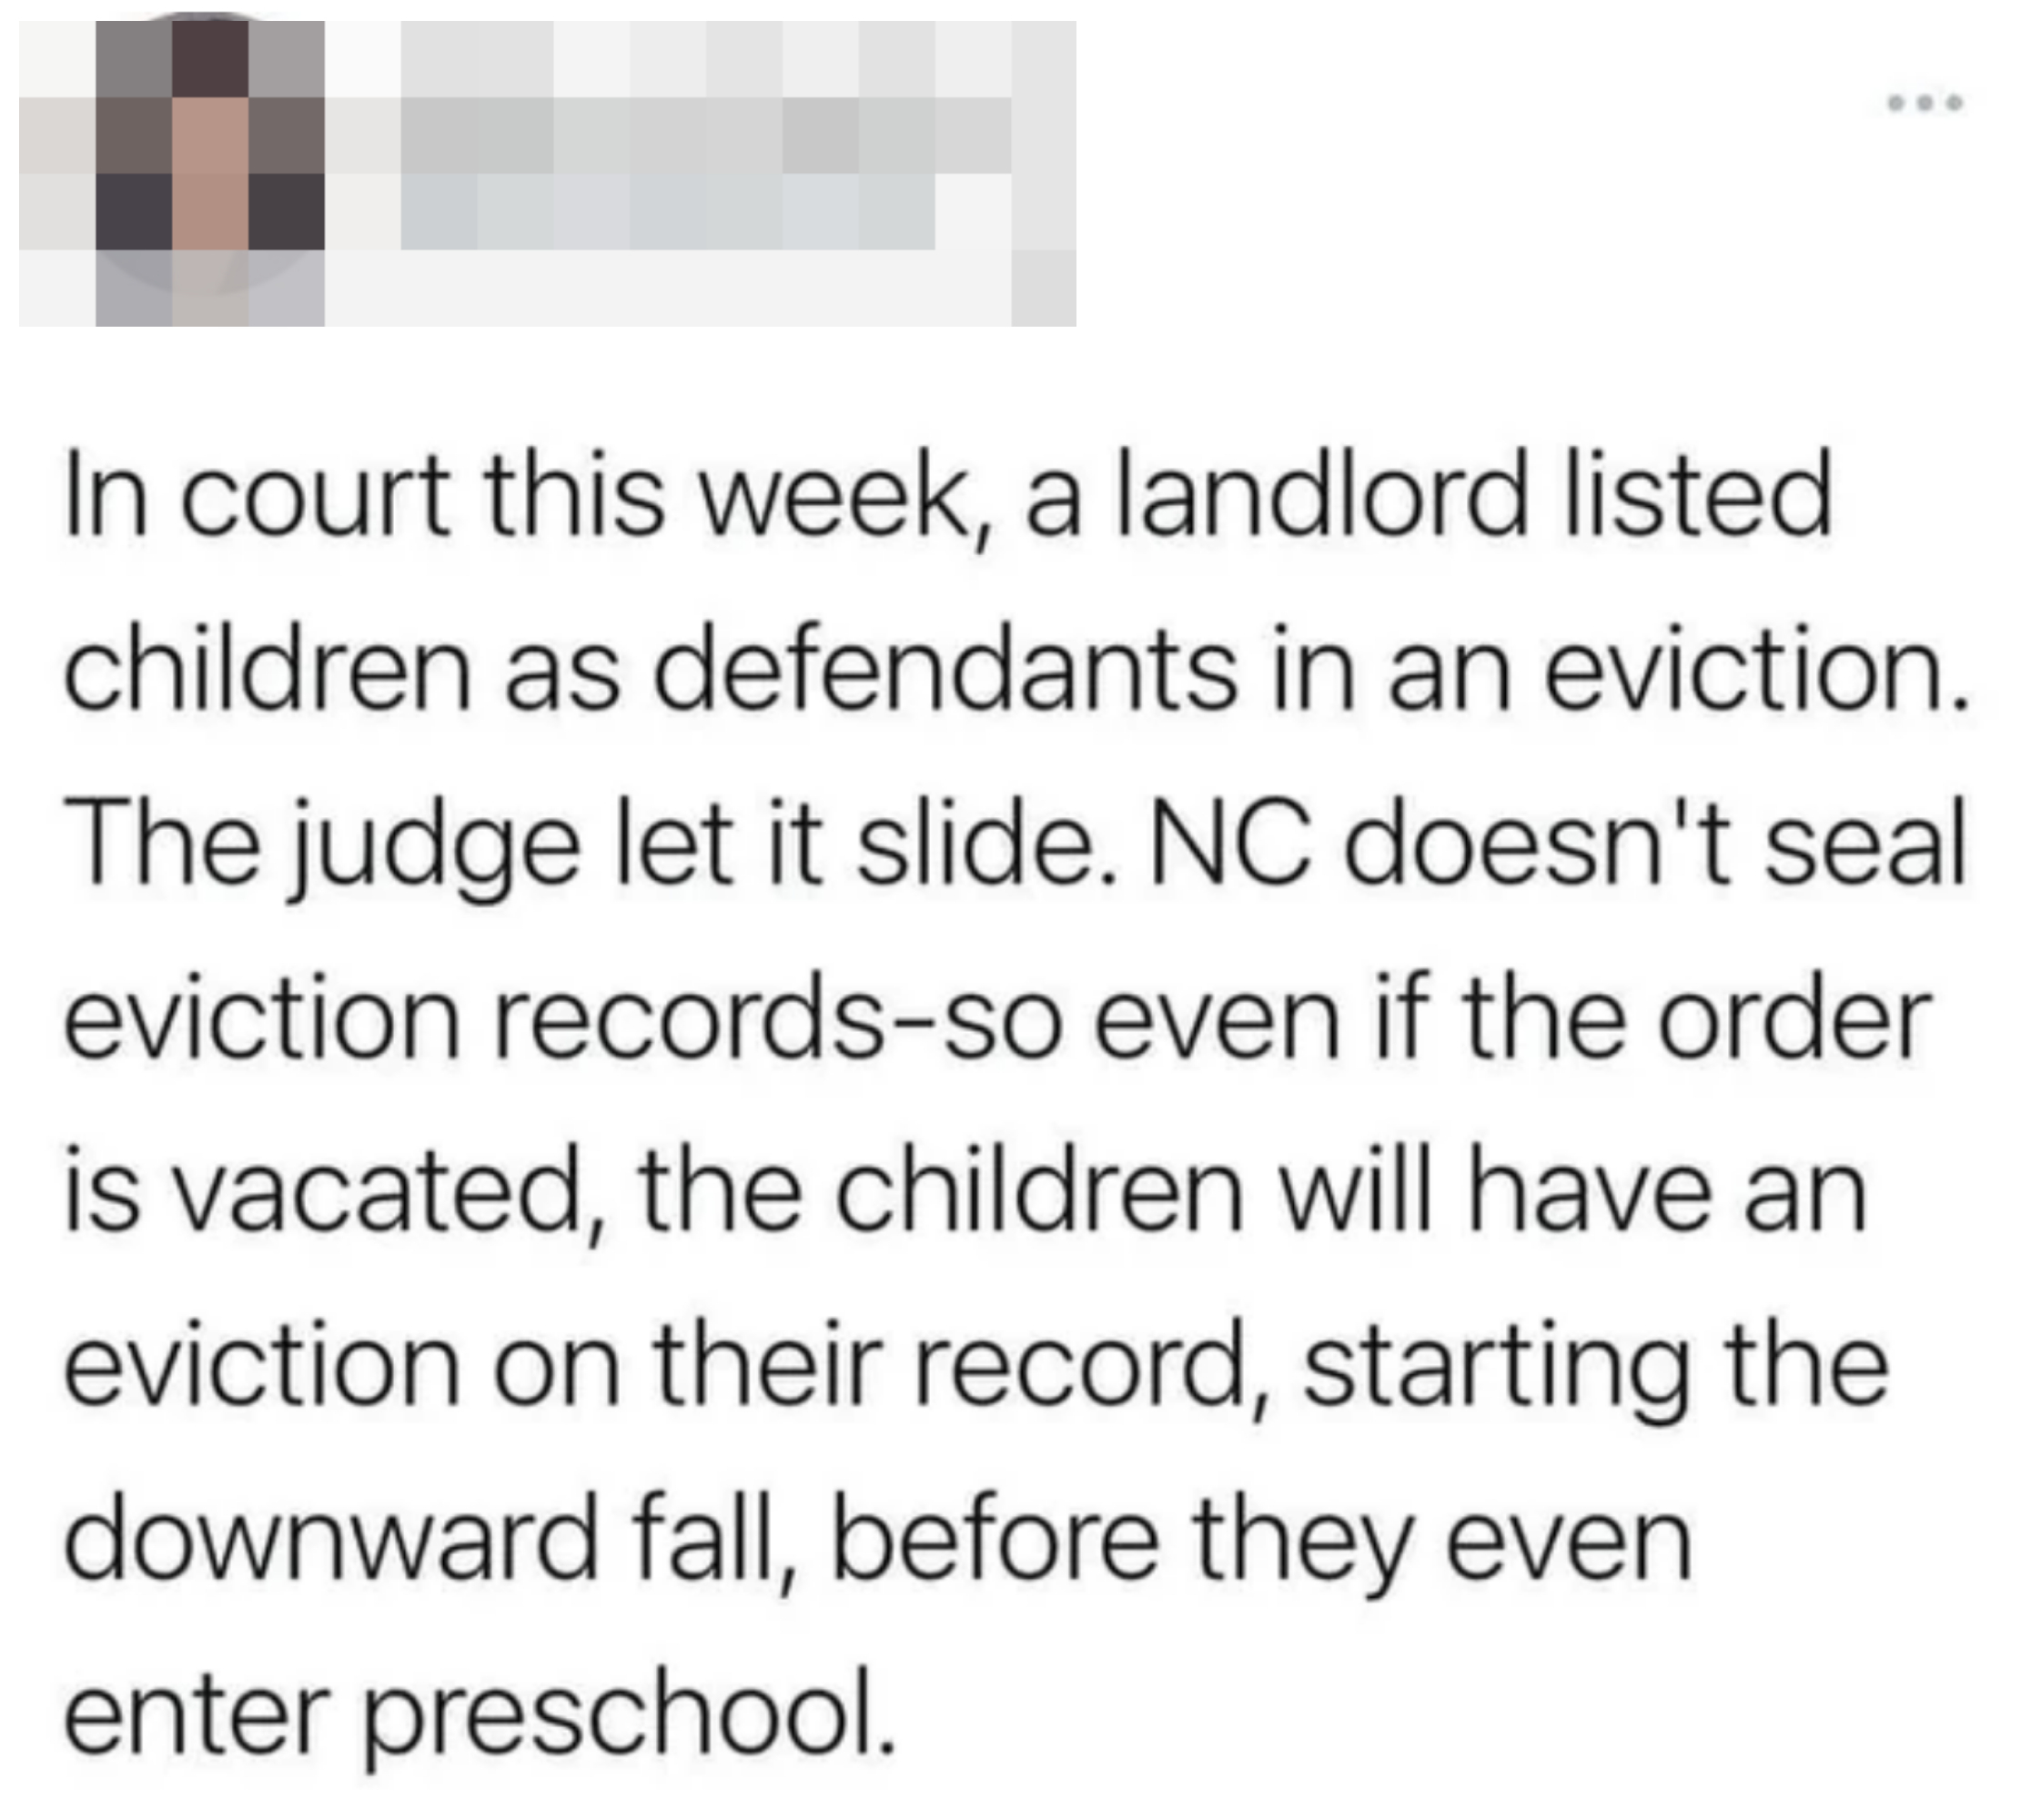 a landlord listed children as defendants in an eviction. the judge let it slide and so if it goes through the children will have an eviction on their record starting a downward fall for their future